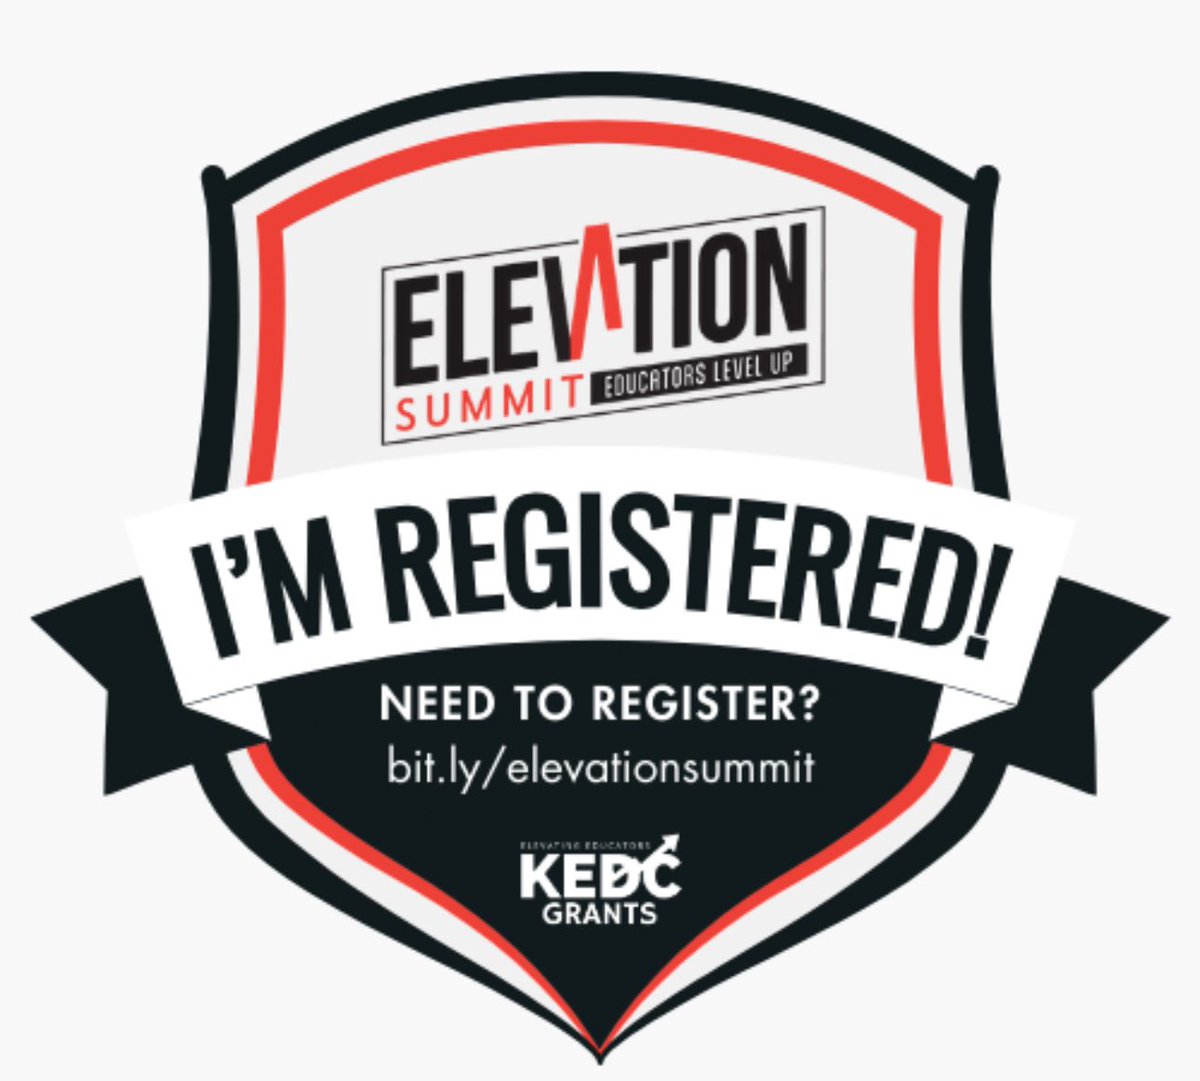 Got the email at 9:46 registered by 9:48! To say I’m excited is an understatement!! I love summer conference!! #readytolearn @KEDCGrants @KedcARTS